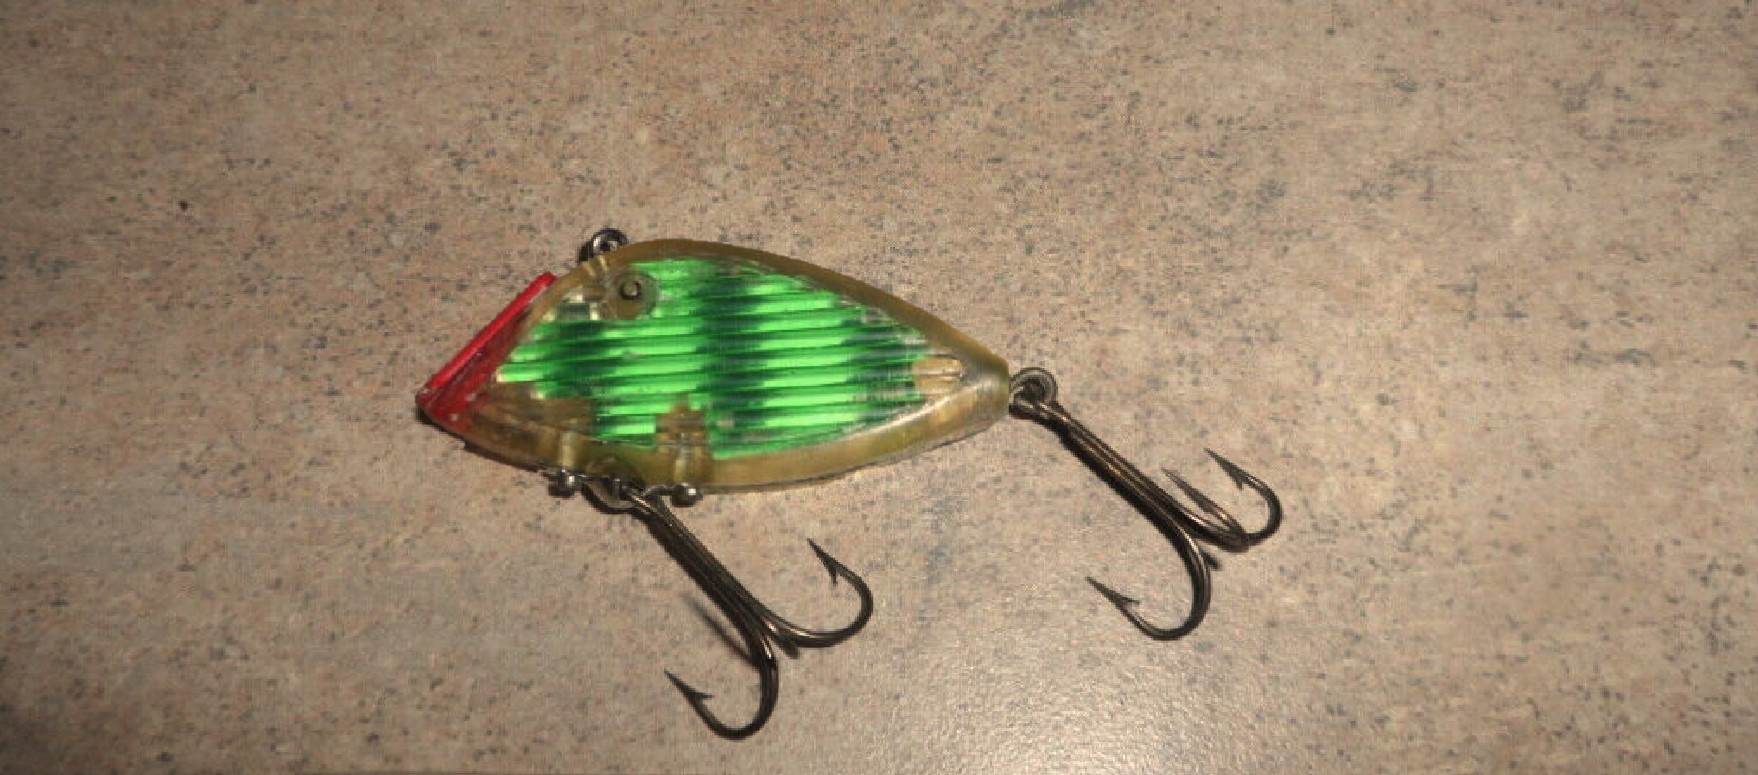 I buy old antique lures and reels. Top dollar paid. See my photo